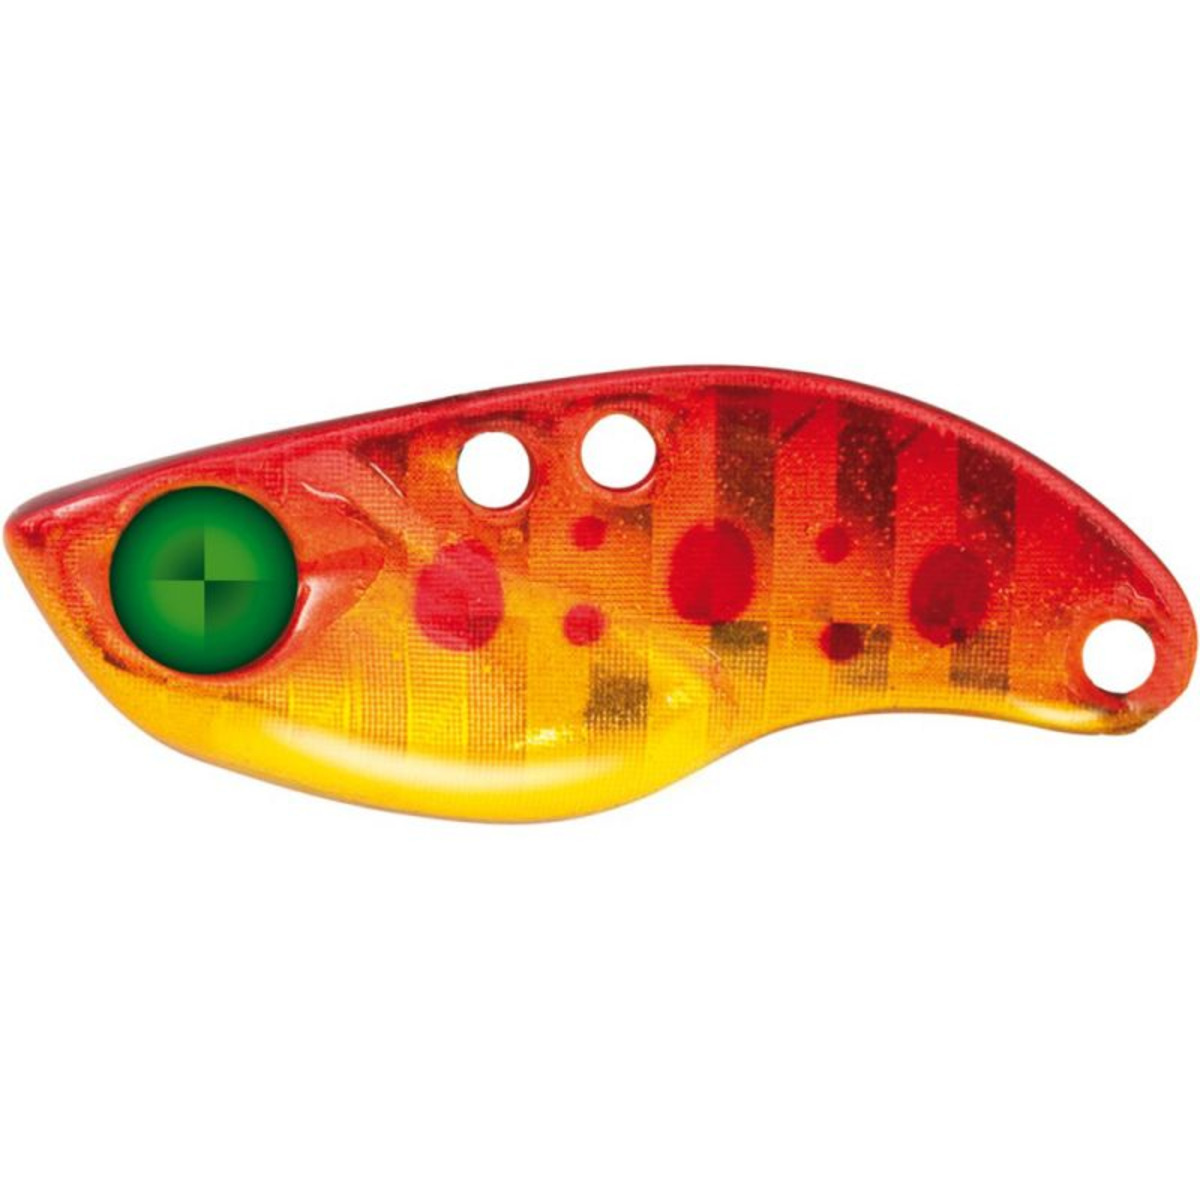 Rapture Viber - 2.8 g - 22 mm - Holo Red Trout